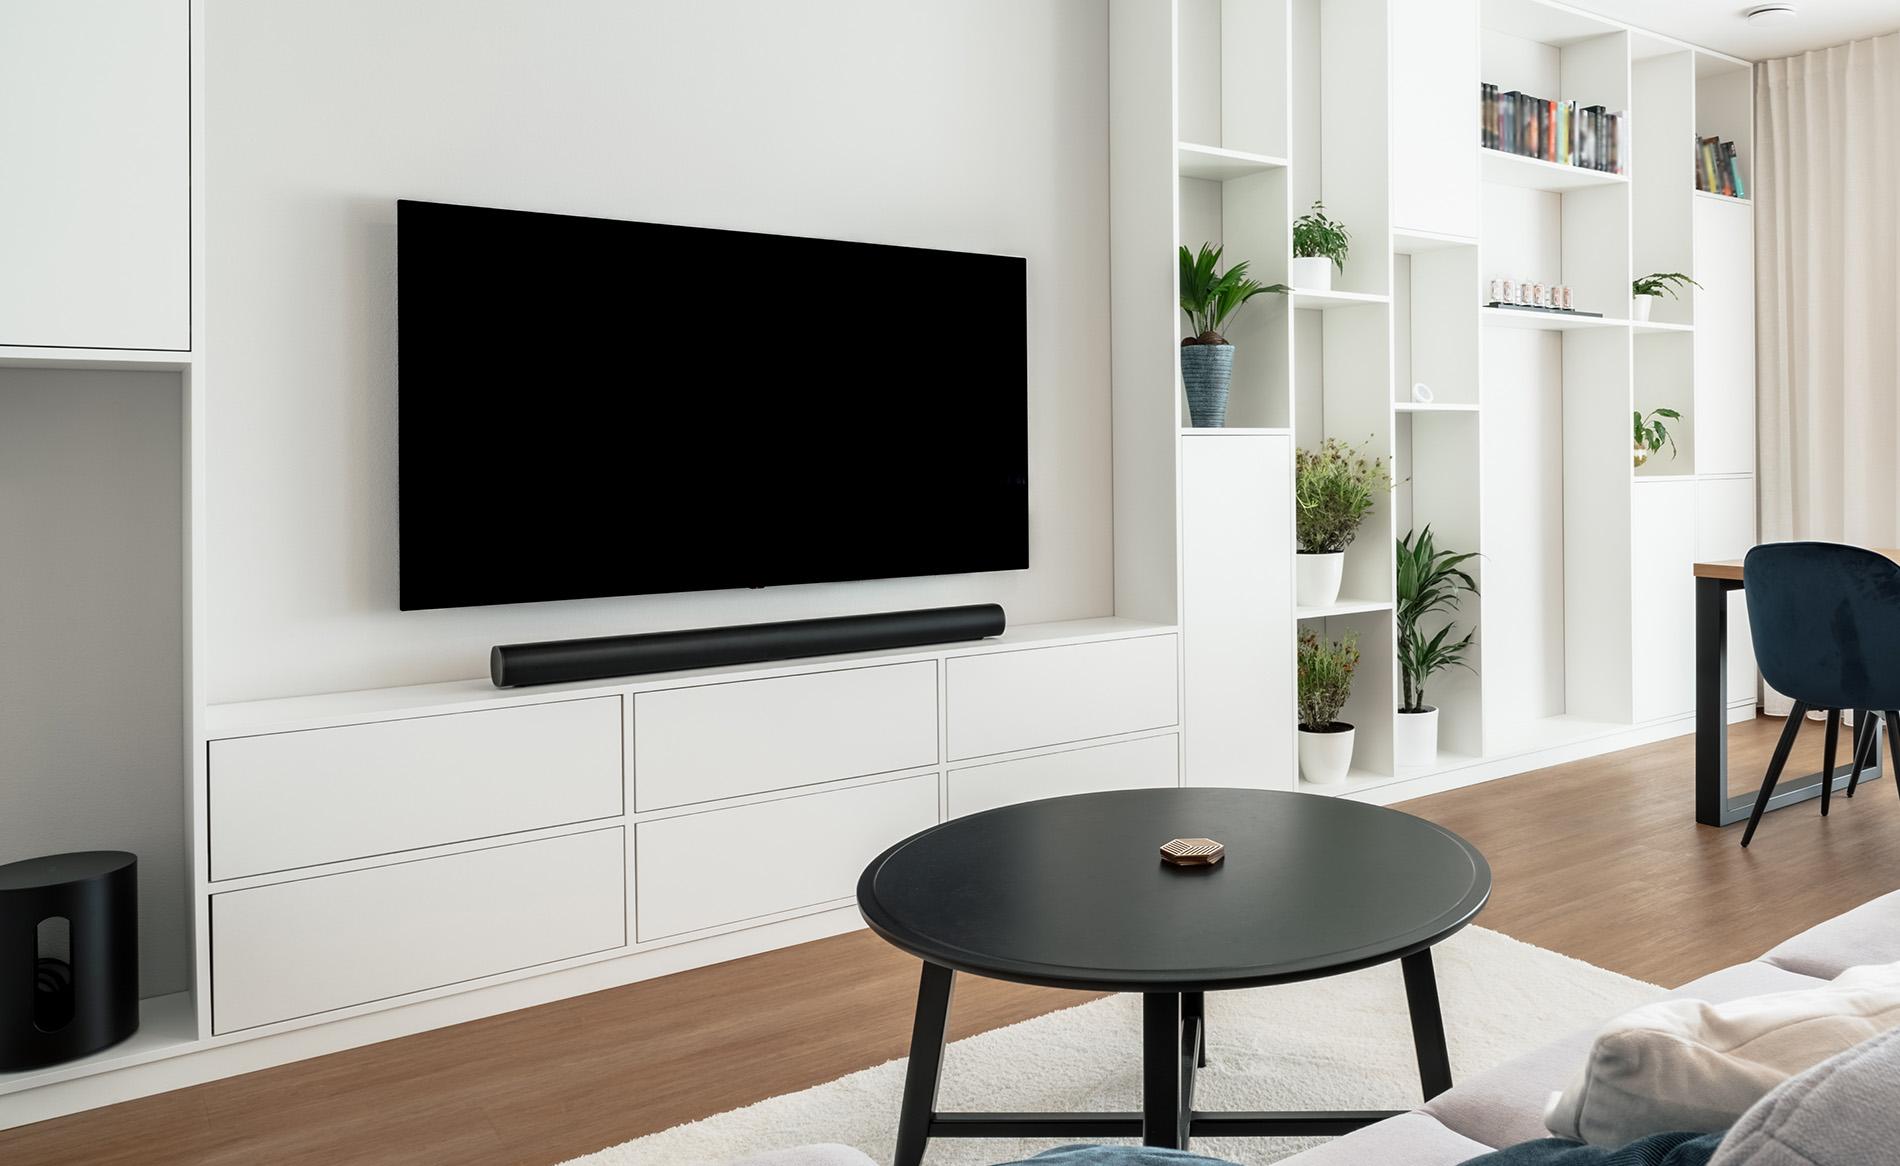 4 ways to connect your soundbar to your TV | Currys